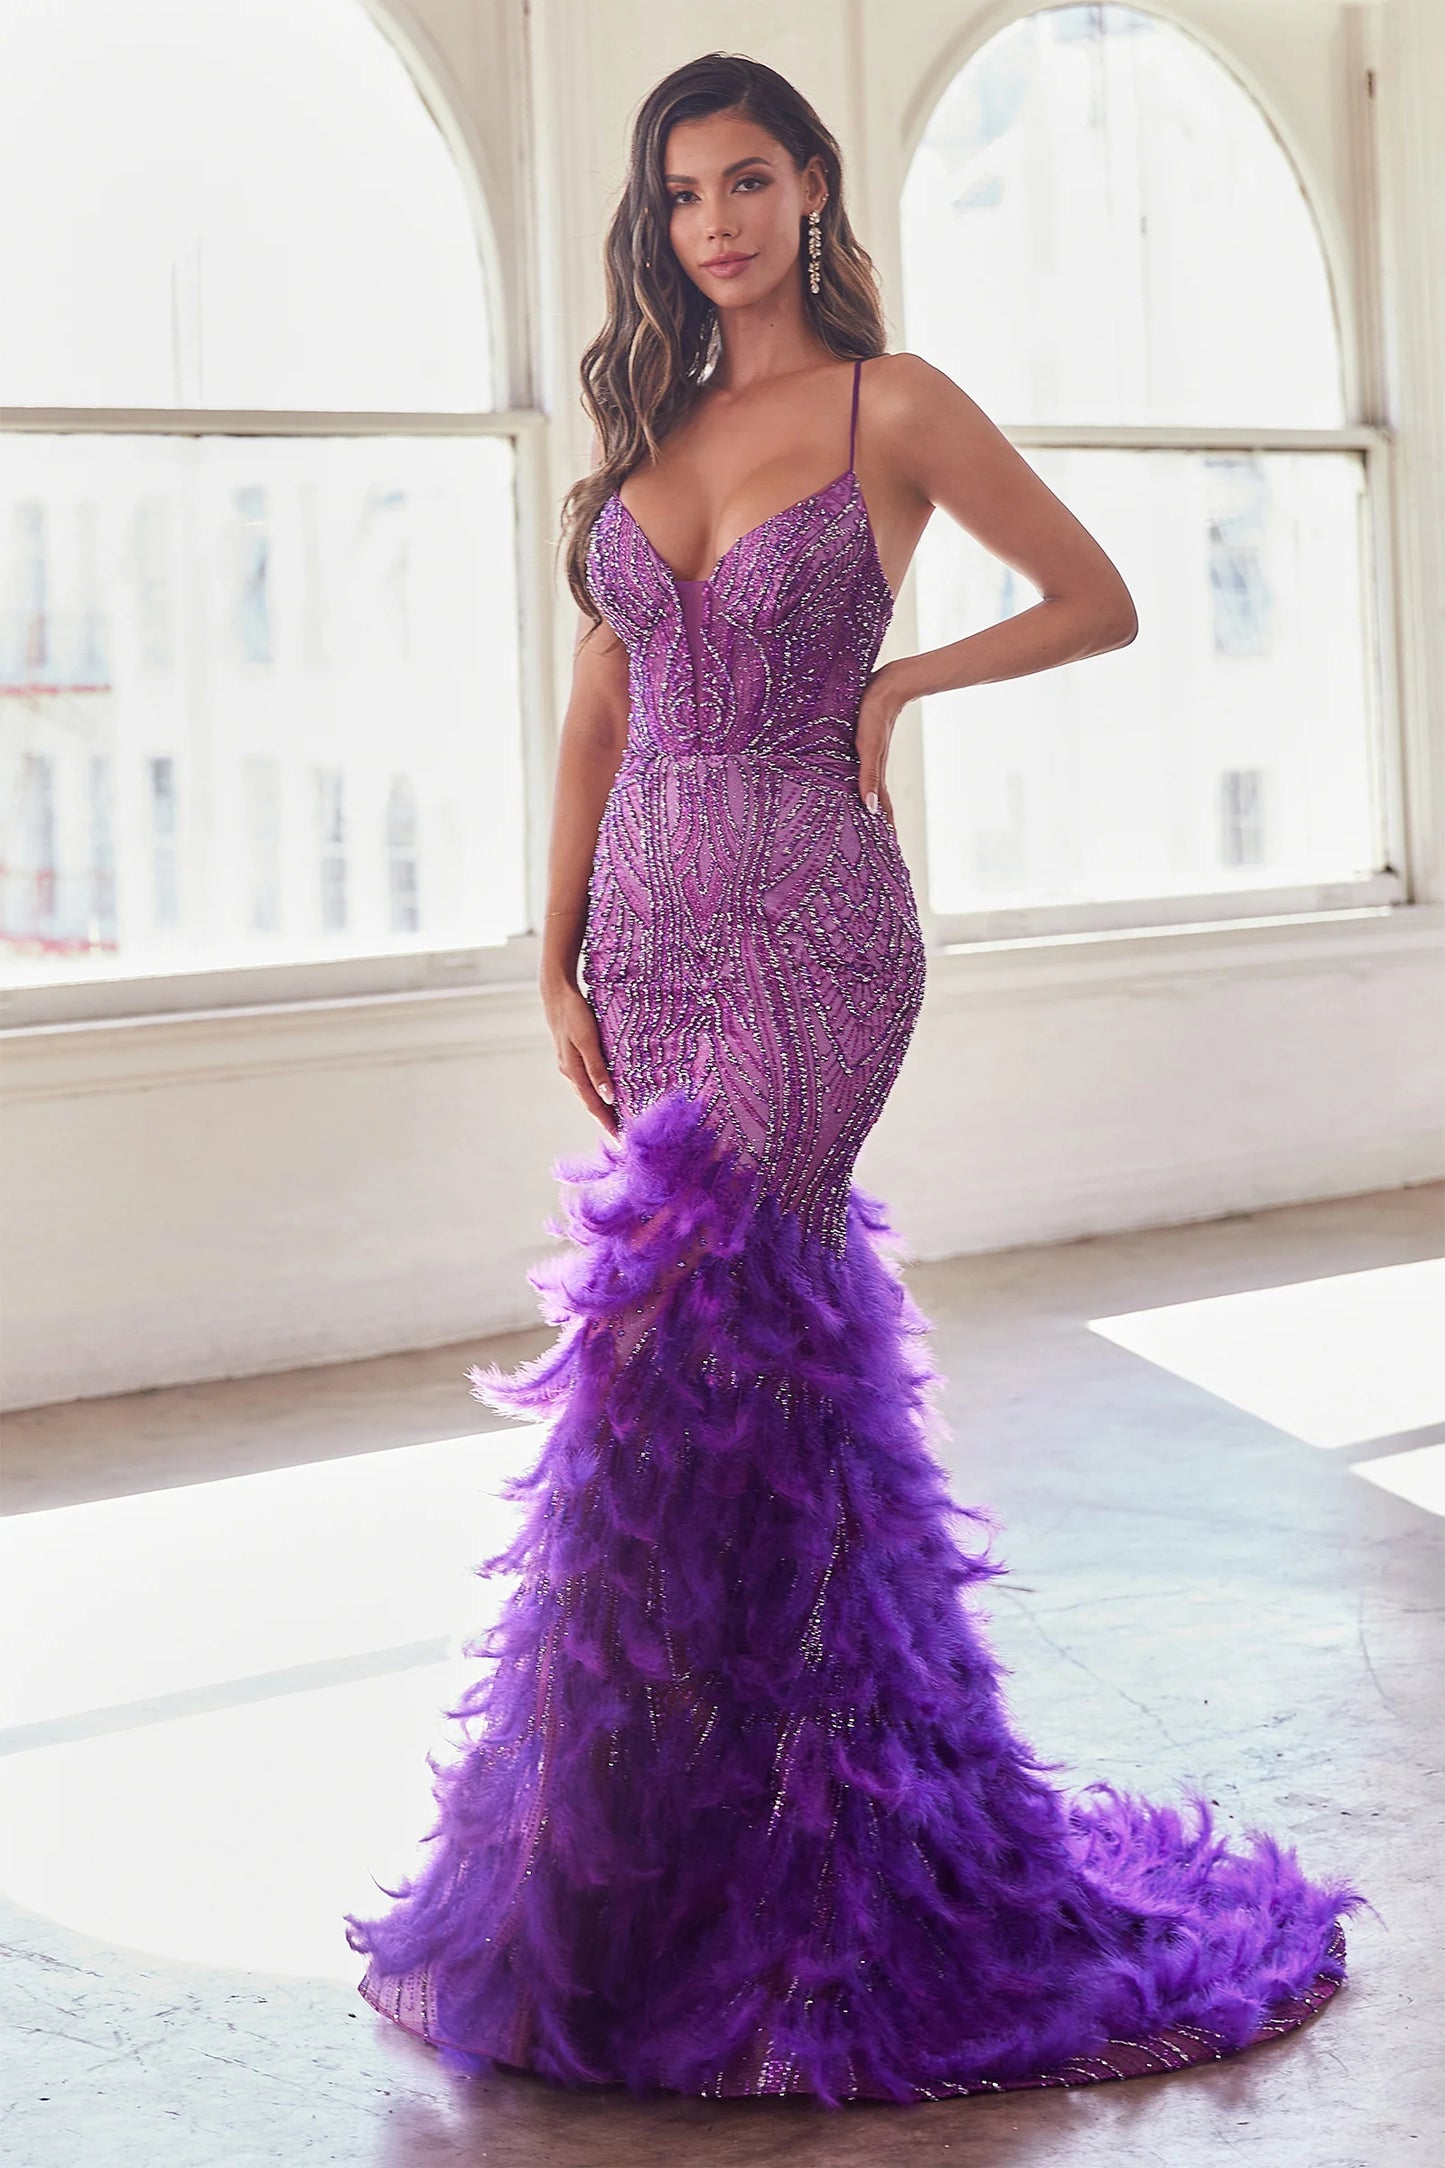 LaDivine CC2308 Enchanting Mermaid Prom Dress - A captivating mermaid silhouette dress with thin straps, v-neckline, glitter and bead embellishments on the sheer boned bodice, a tiered feathered skirt, and an open lace-up corset back. The model is wearing the dress in Nova Purple.